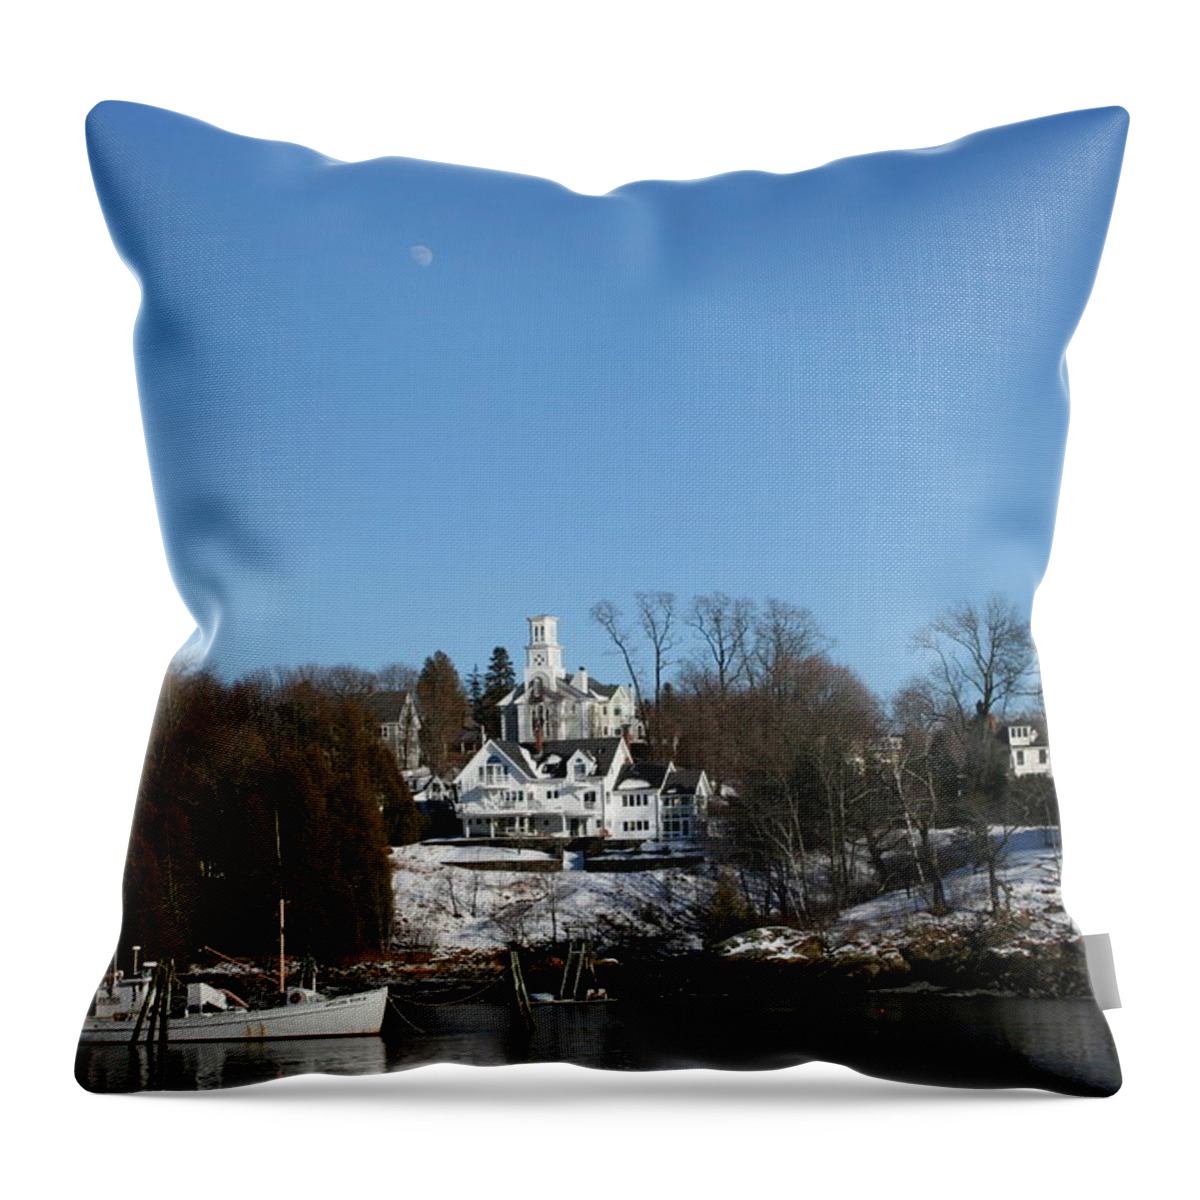 Landscape Throw Pillow featuring the photograph Quiet Harbor by Doug Mills